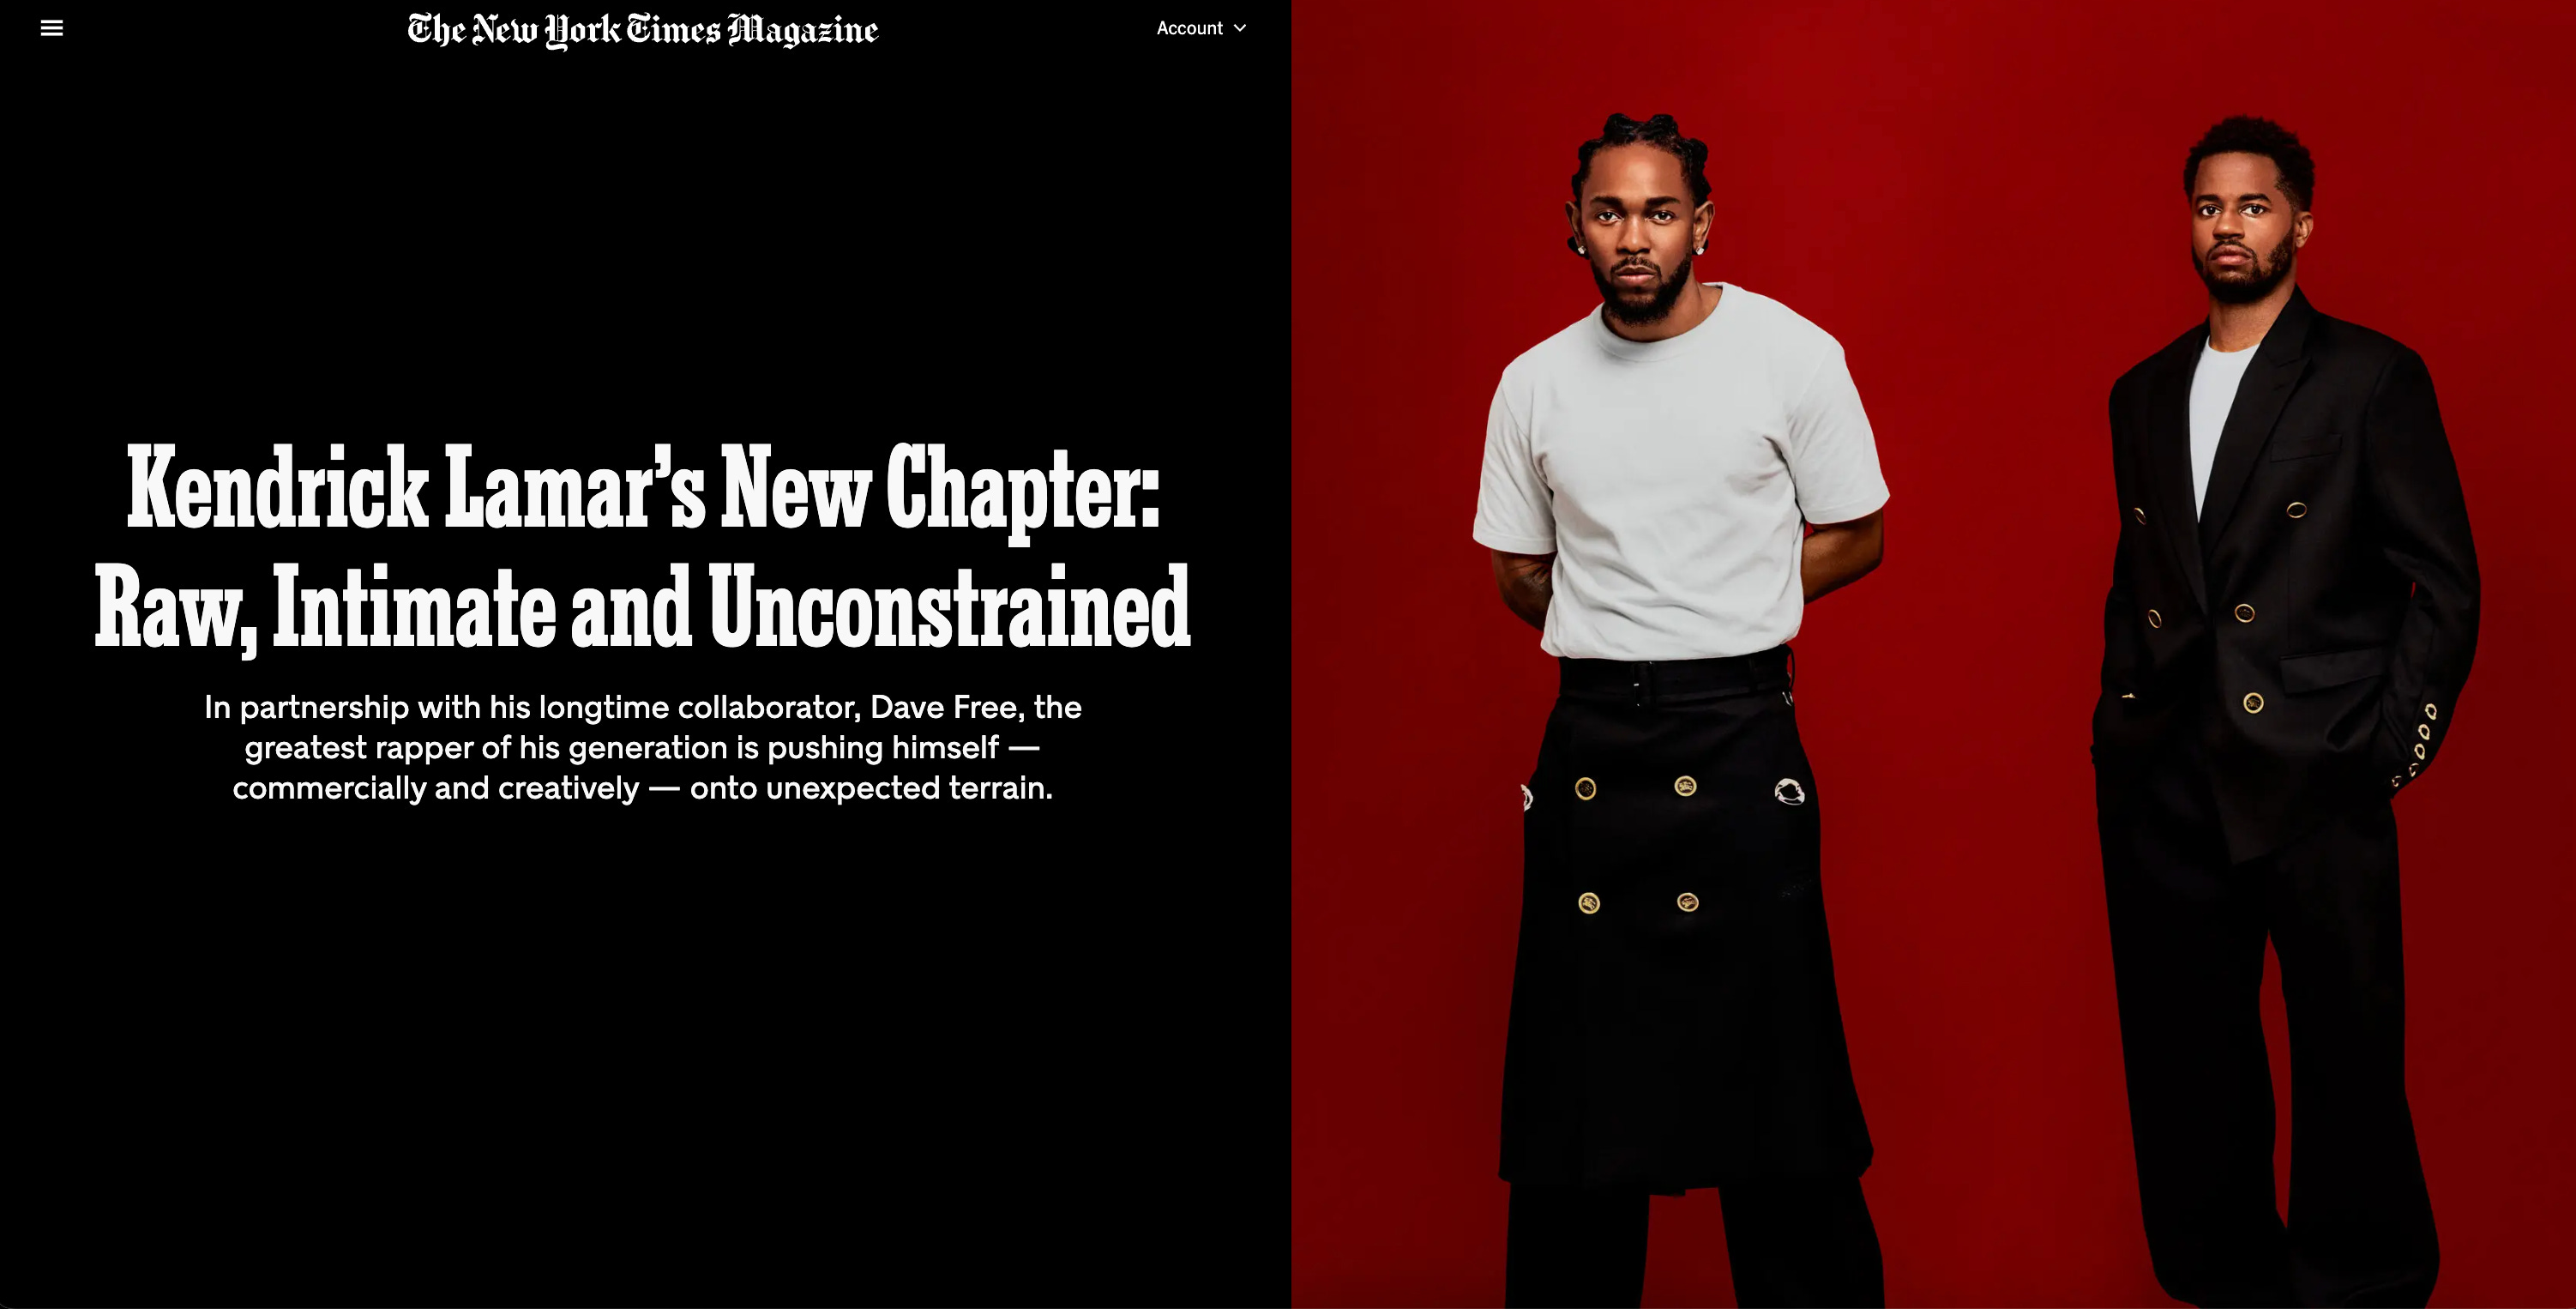 Kendrick Lamar's New Chapter With Dave Free - The New York Times